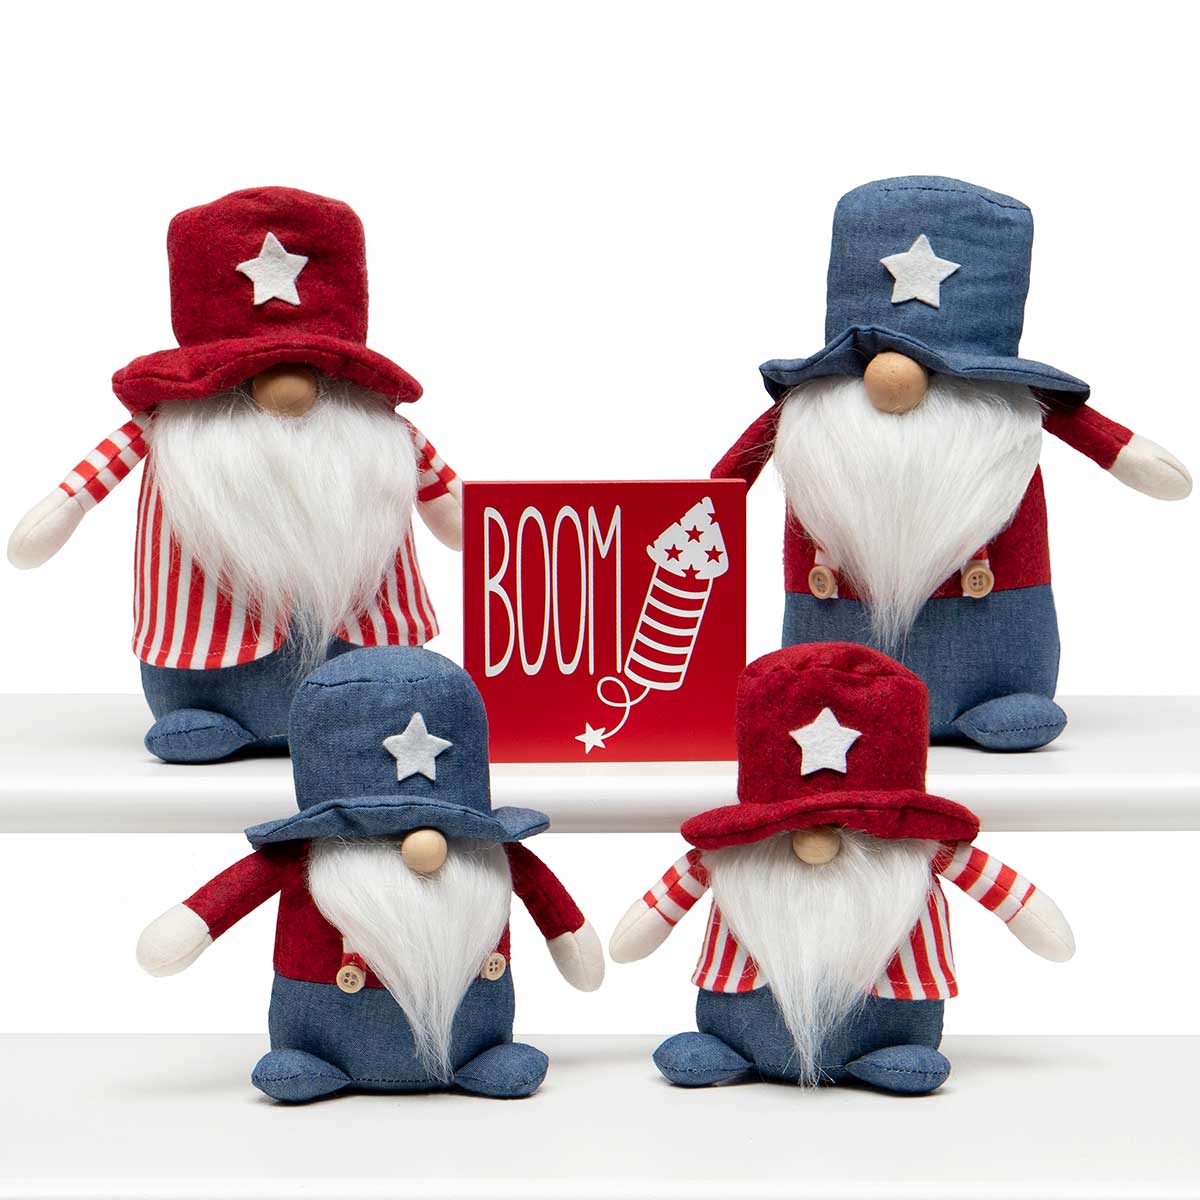 !Stars/Stripes Gnome with Wood Nose 7" Small